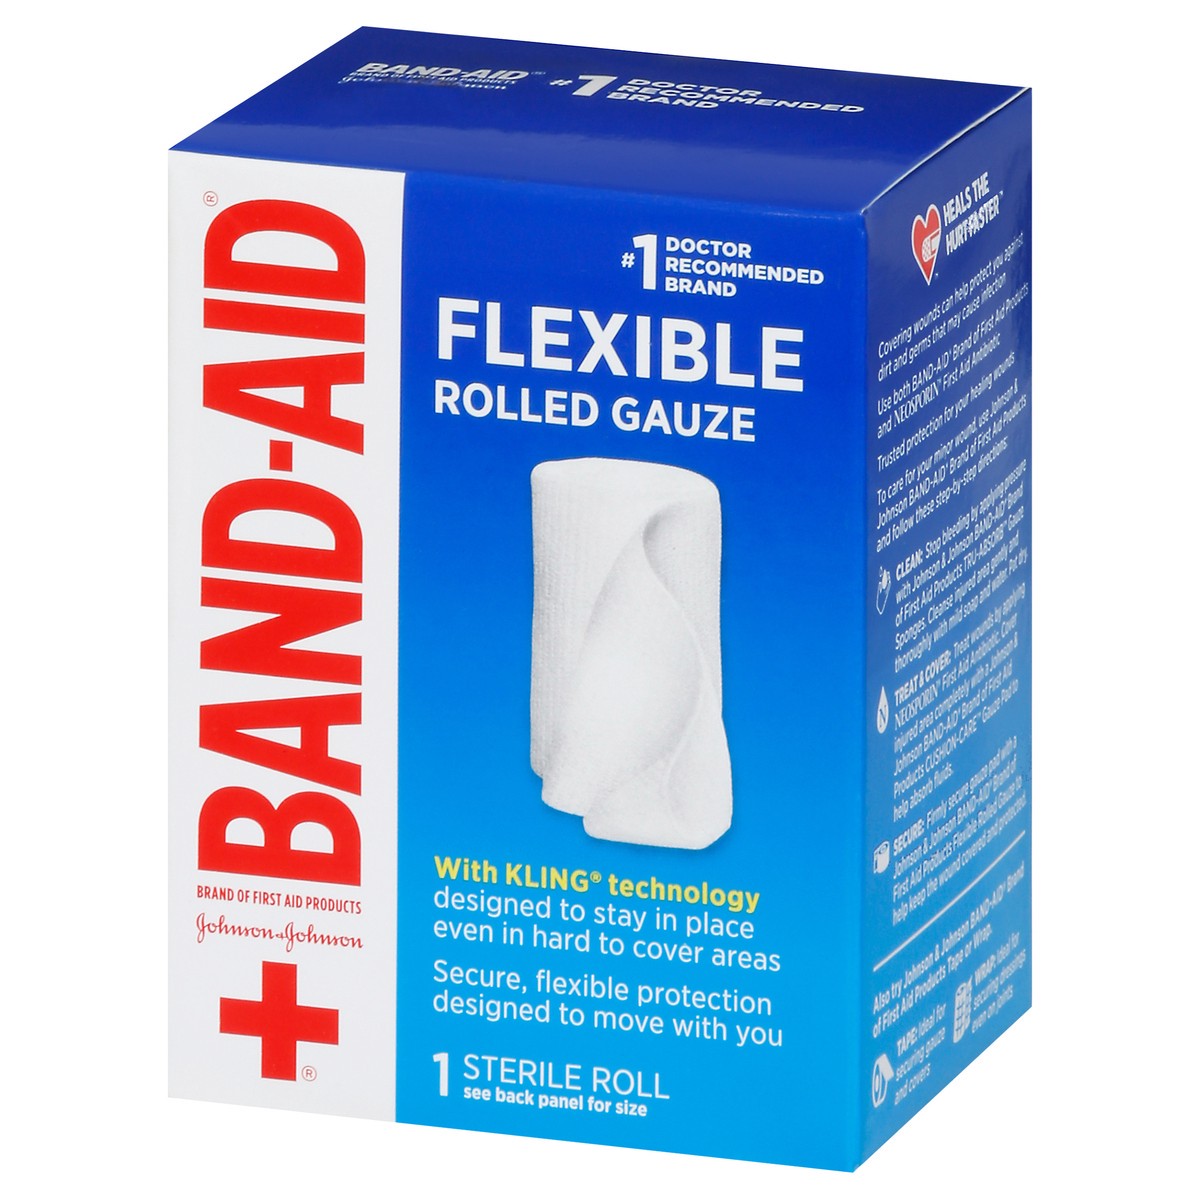 slide 2 of 9, BAND-AID Band Aid Brand of First Aid Flexible Rolled Gauze Dressing for Minor Wound Care, soft Padding and Instant Absorption, 2 Inches by 2.5 Yards, 1 ct